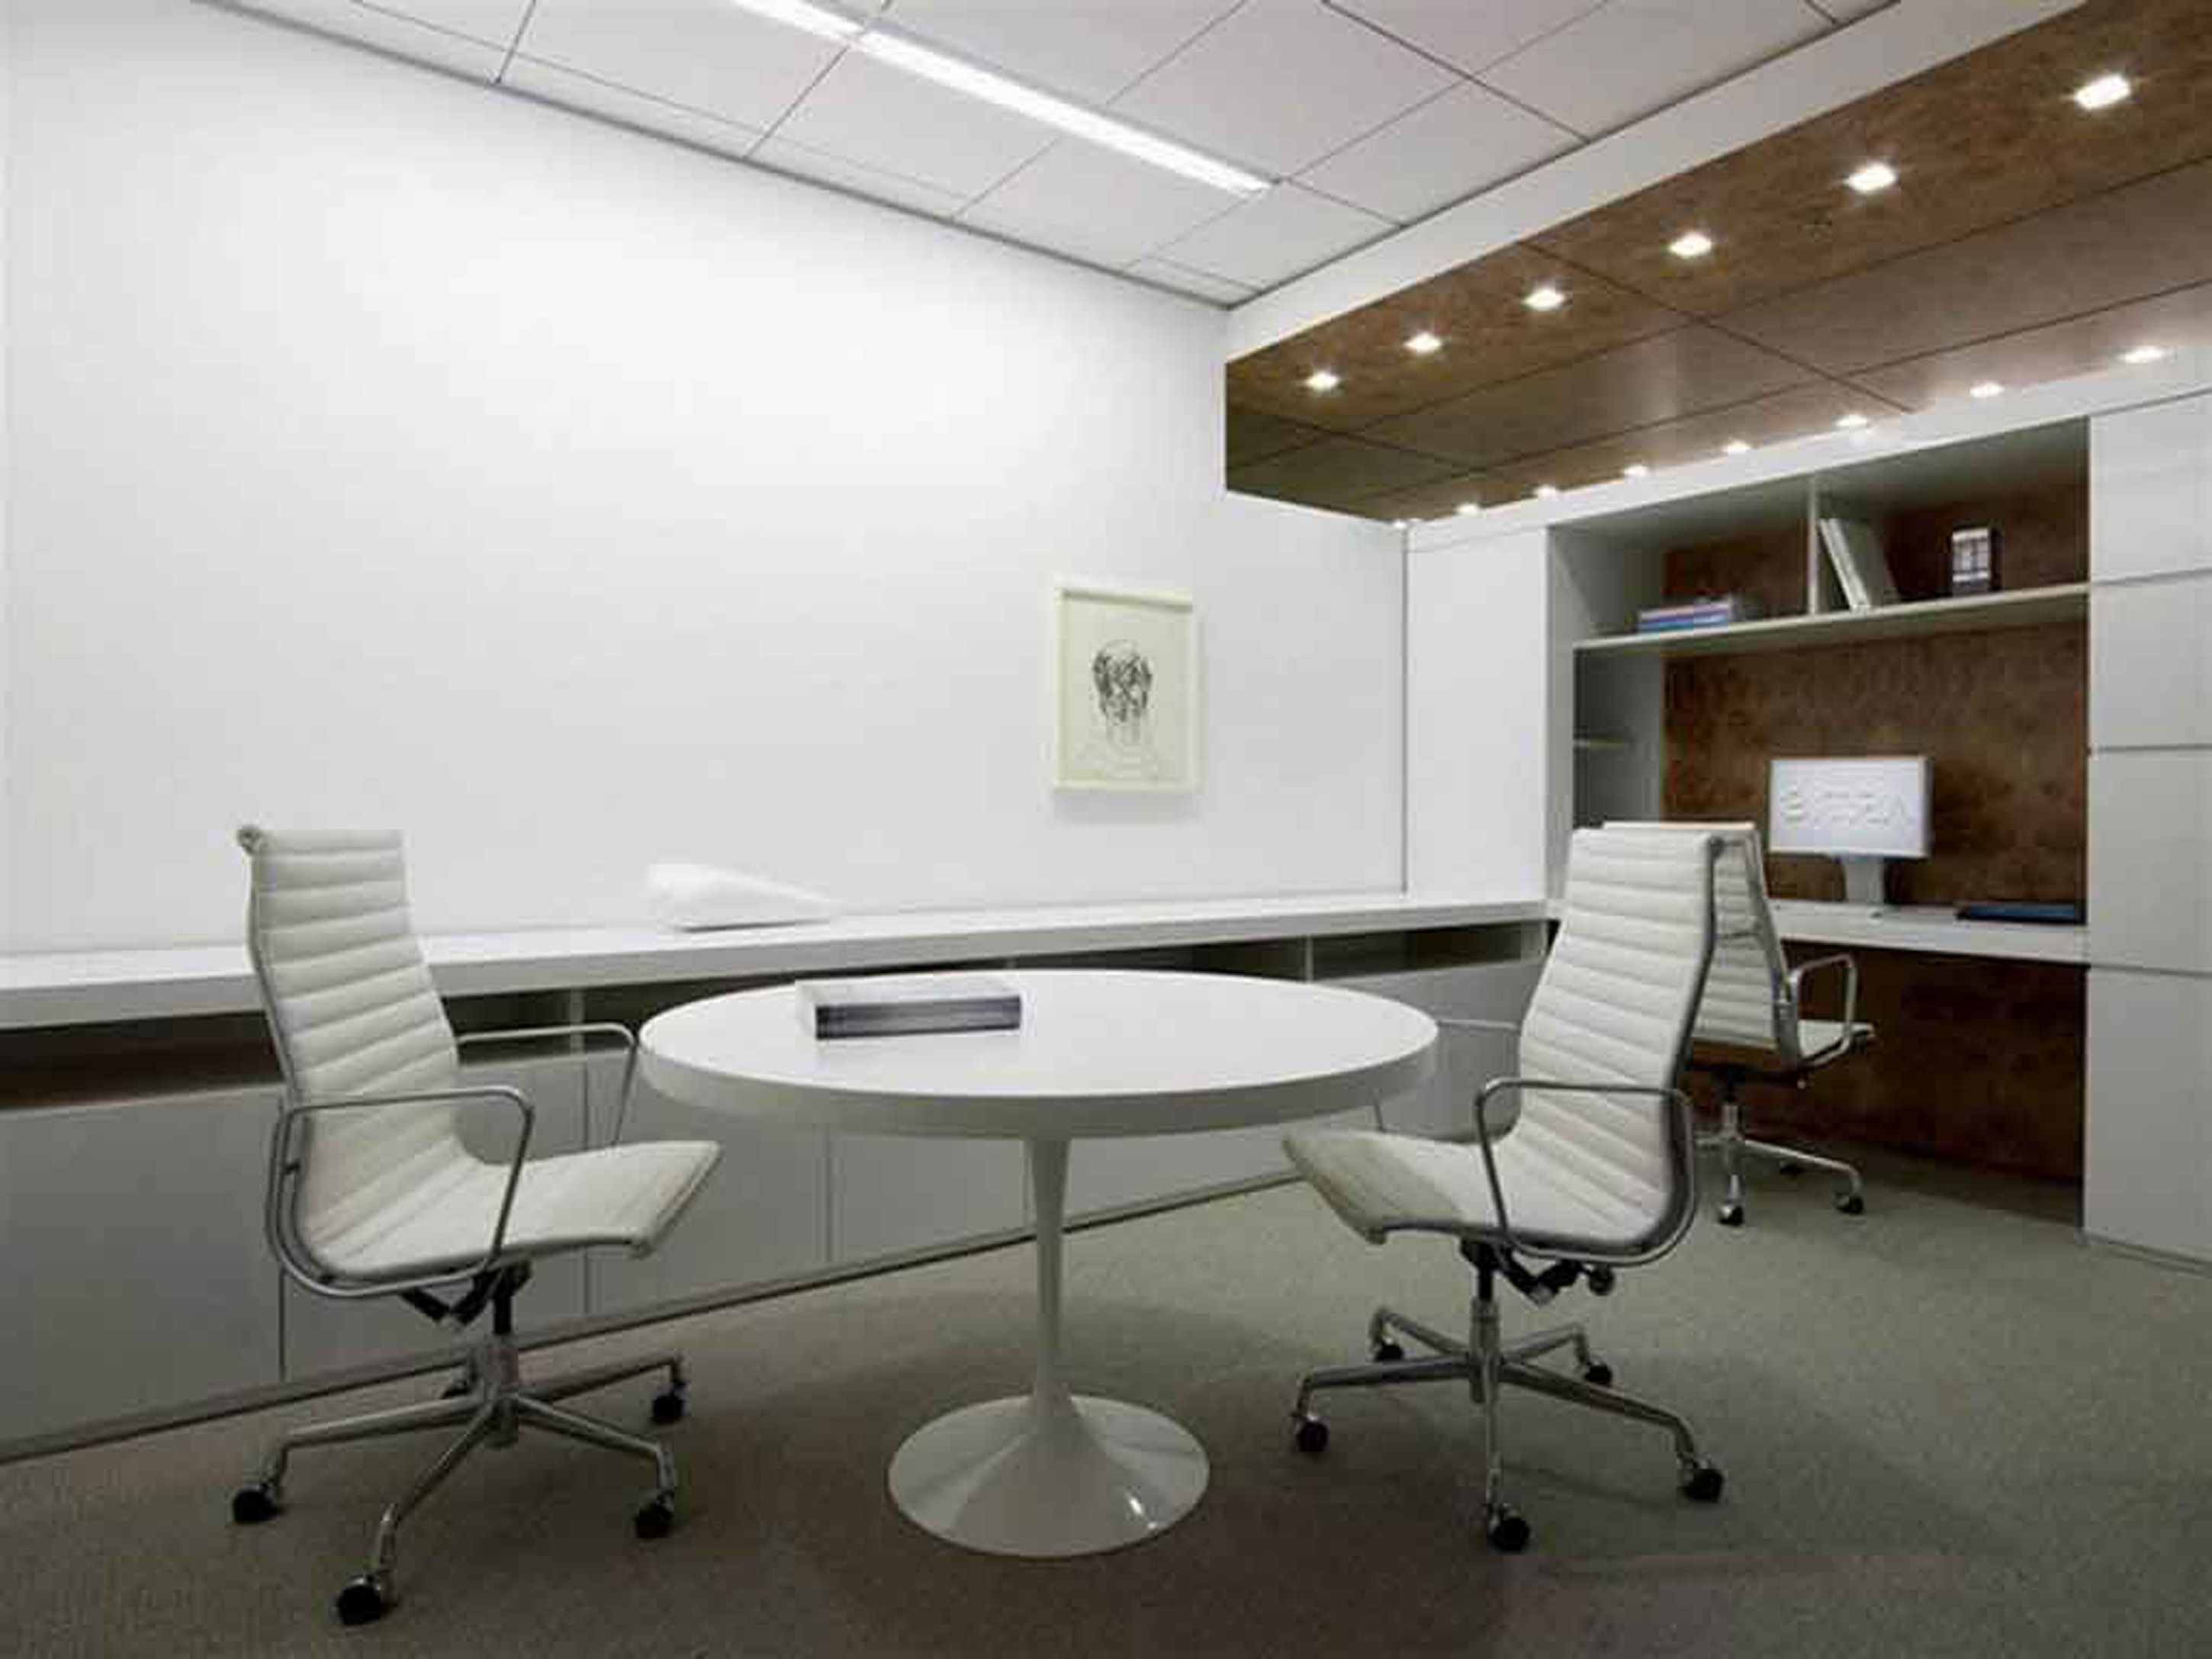 Admirable Modern Office Furniture Design Idea With Round White Table White Chairs And White Open Shelves Alluring Modern Office Furniture Design Ideas (View 20 of 30)